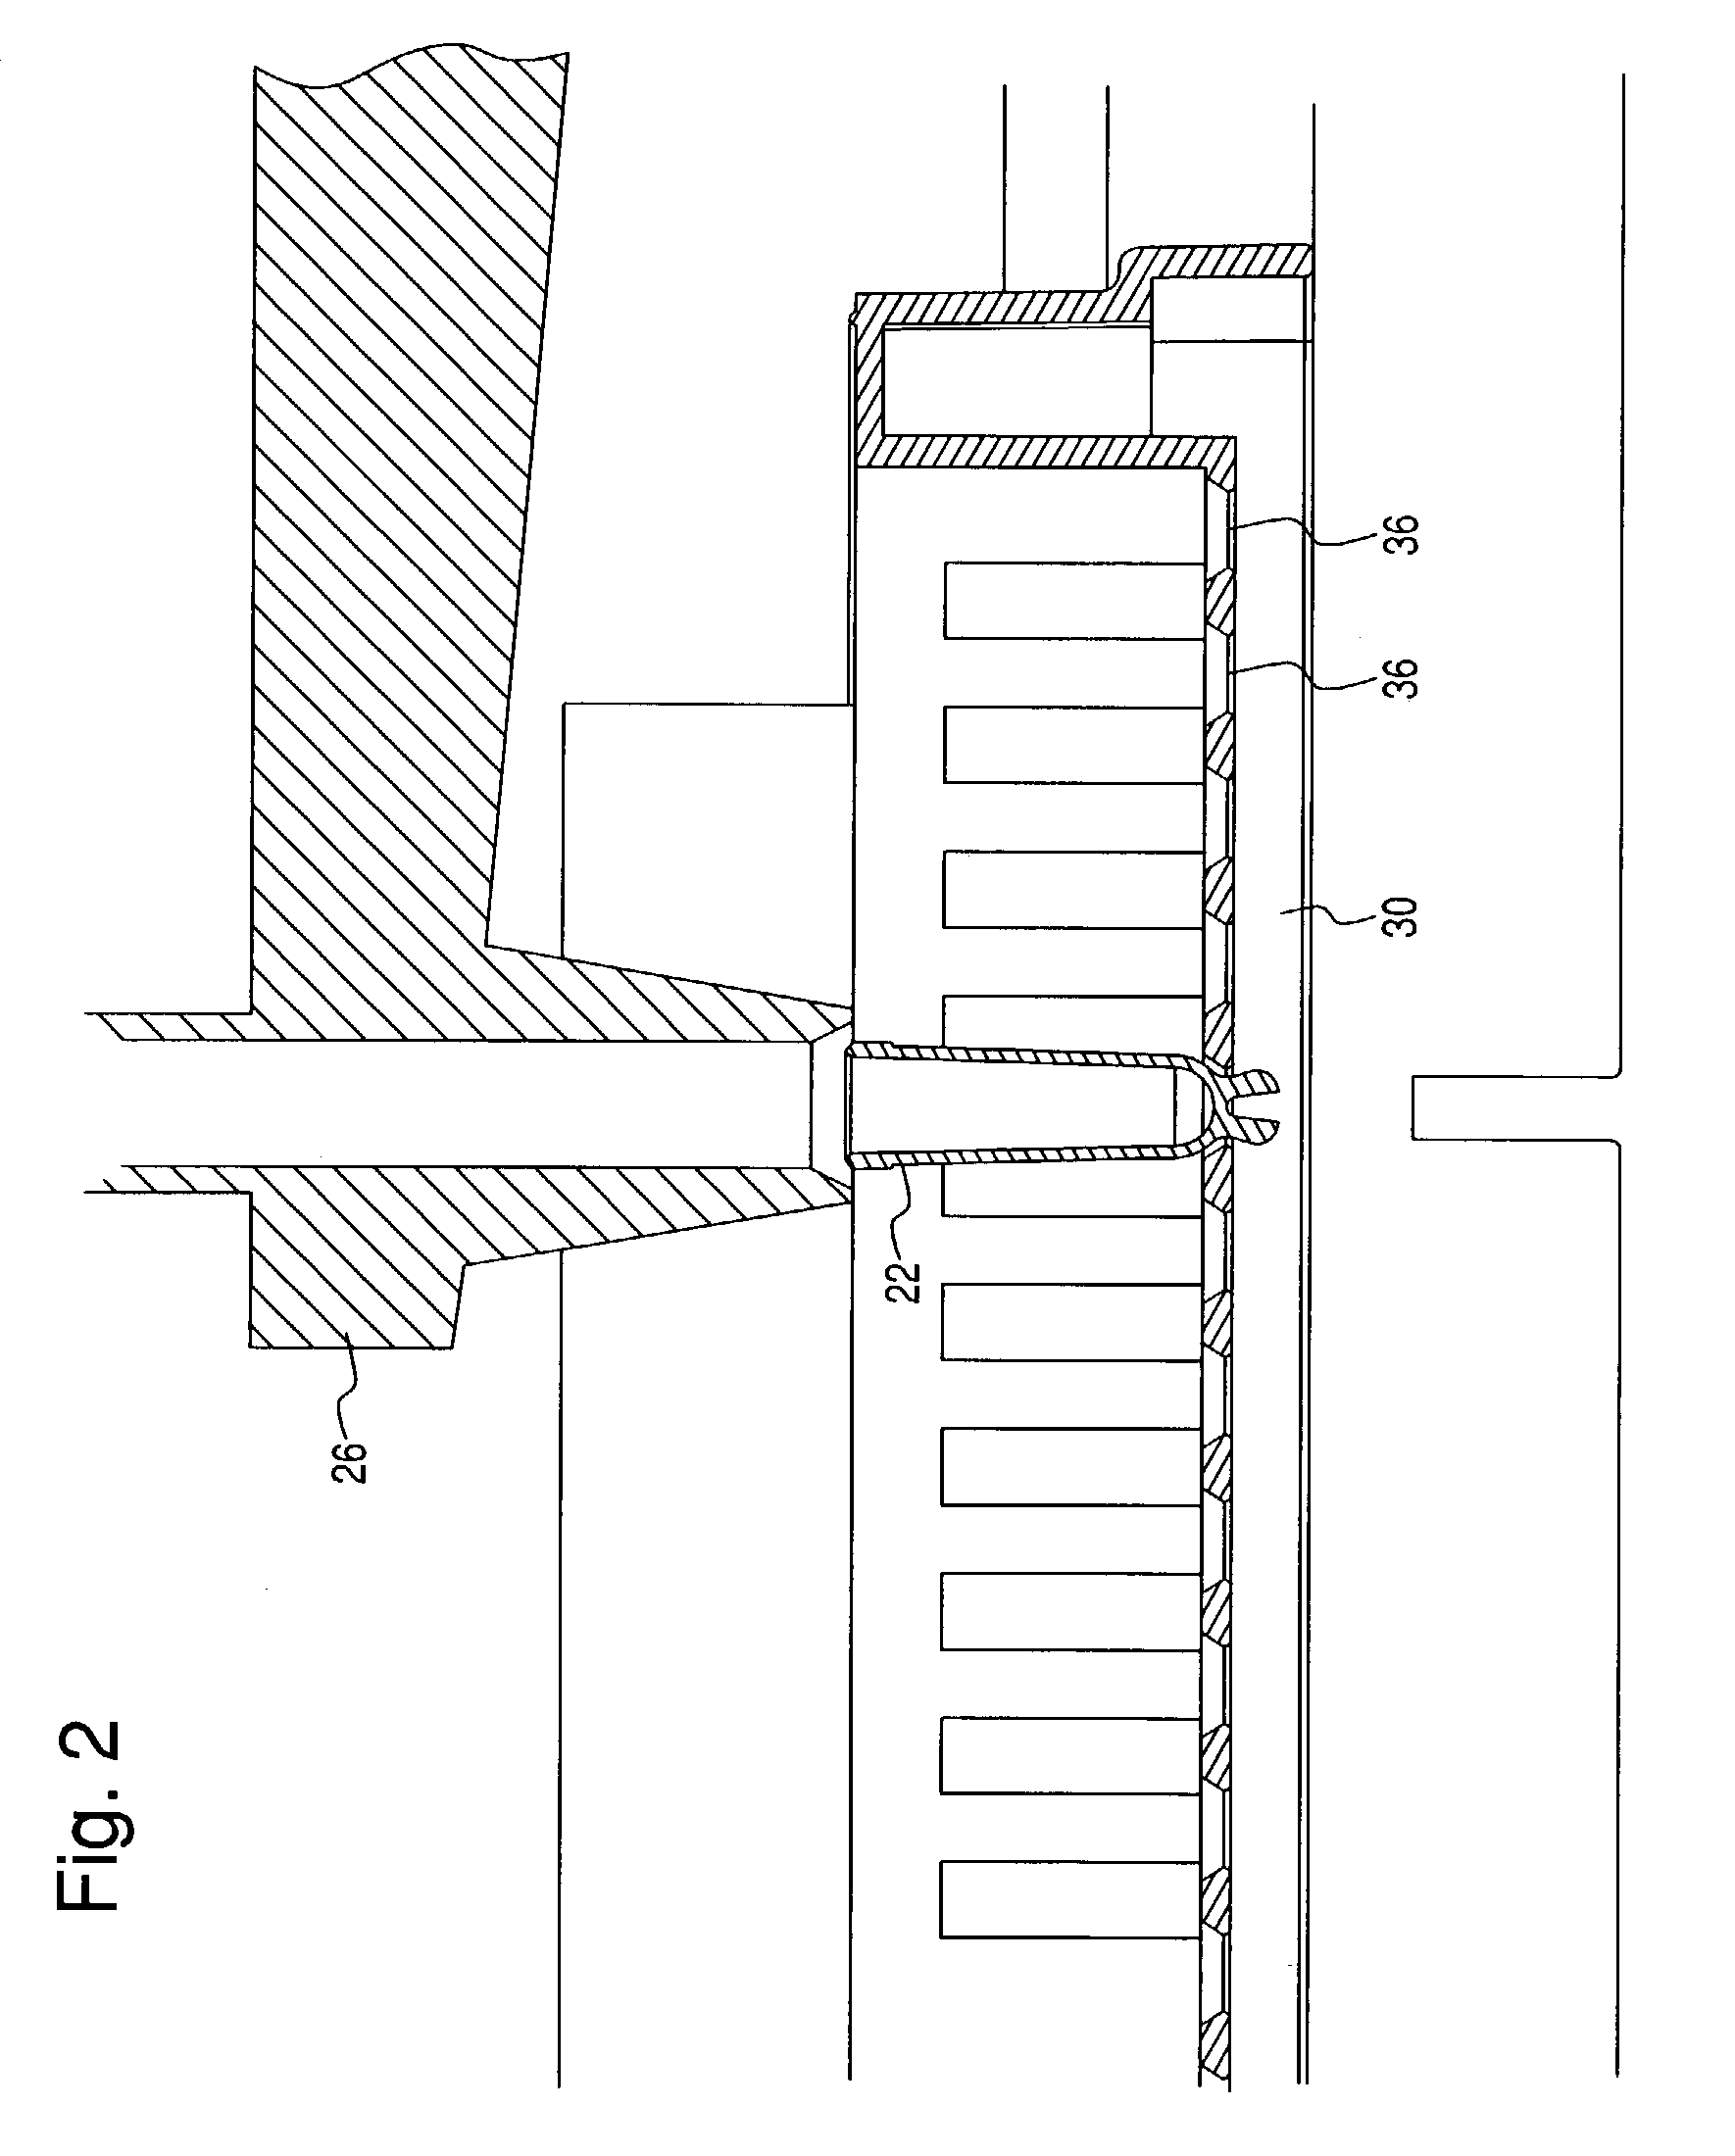 Apparatus for automated storage and retrieval of miniature shelf keeping units